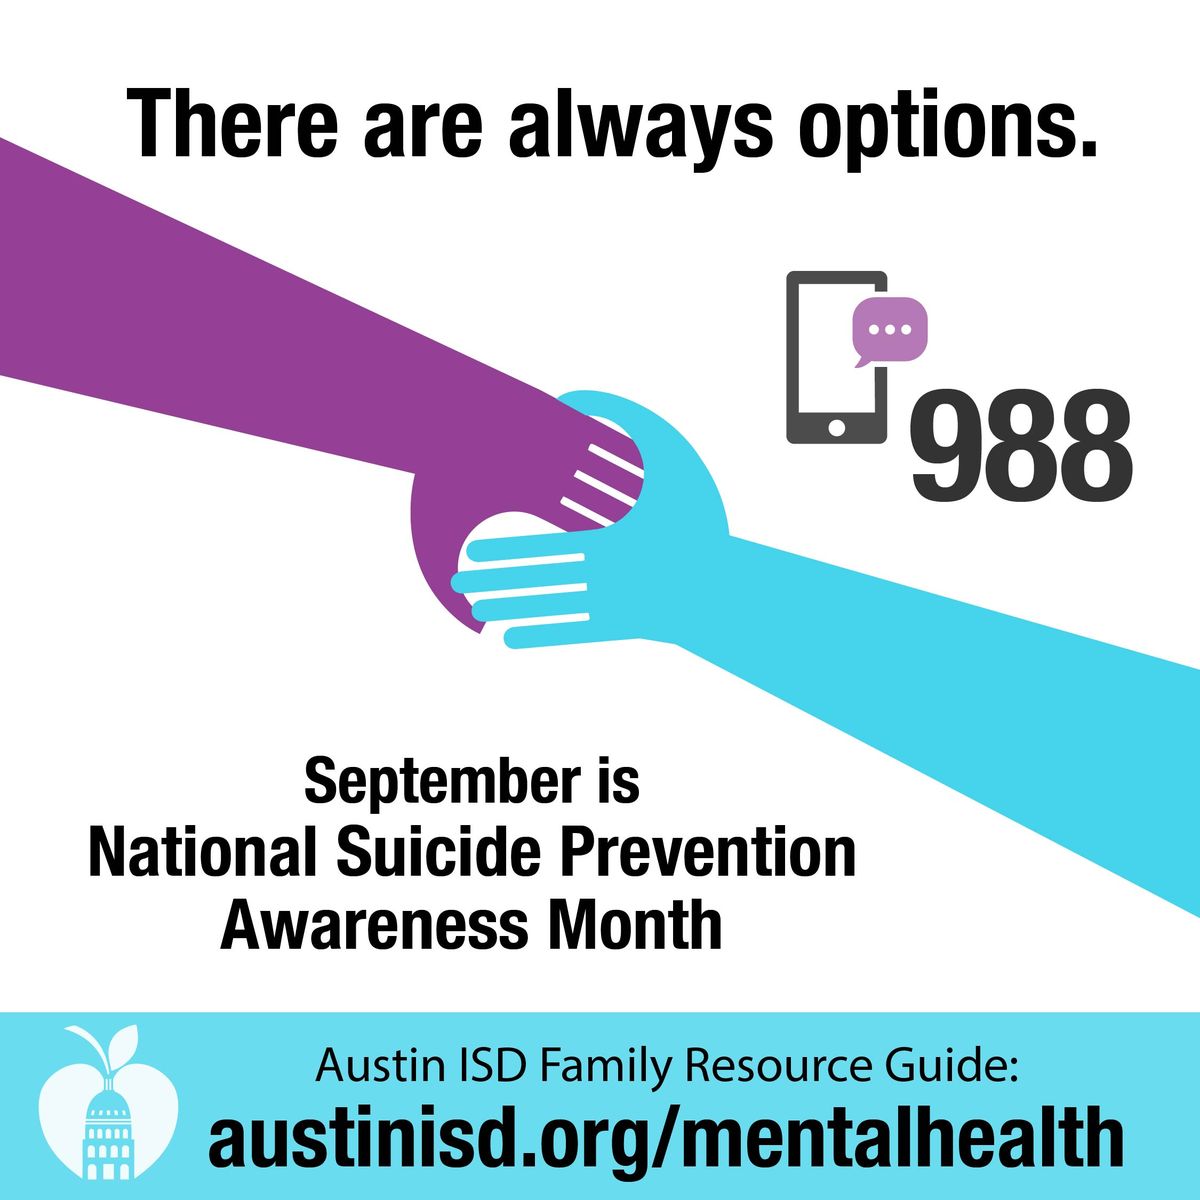 There are always options. September is National Suicide Prevention Awareness Month. Austin ISD Family Resource Guide: www.austinisd.org/mentalhealth